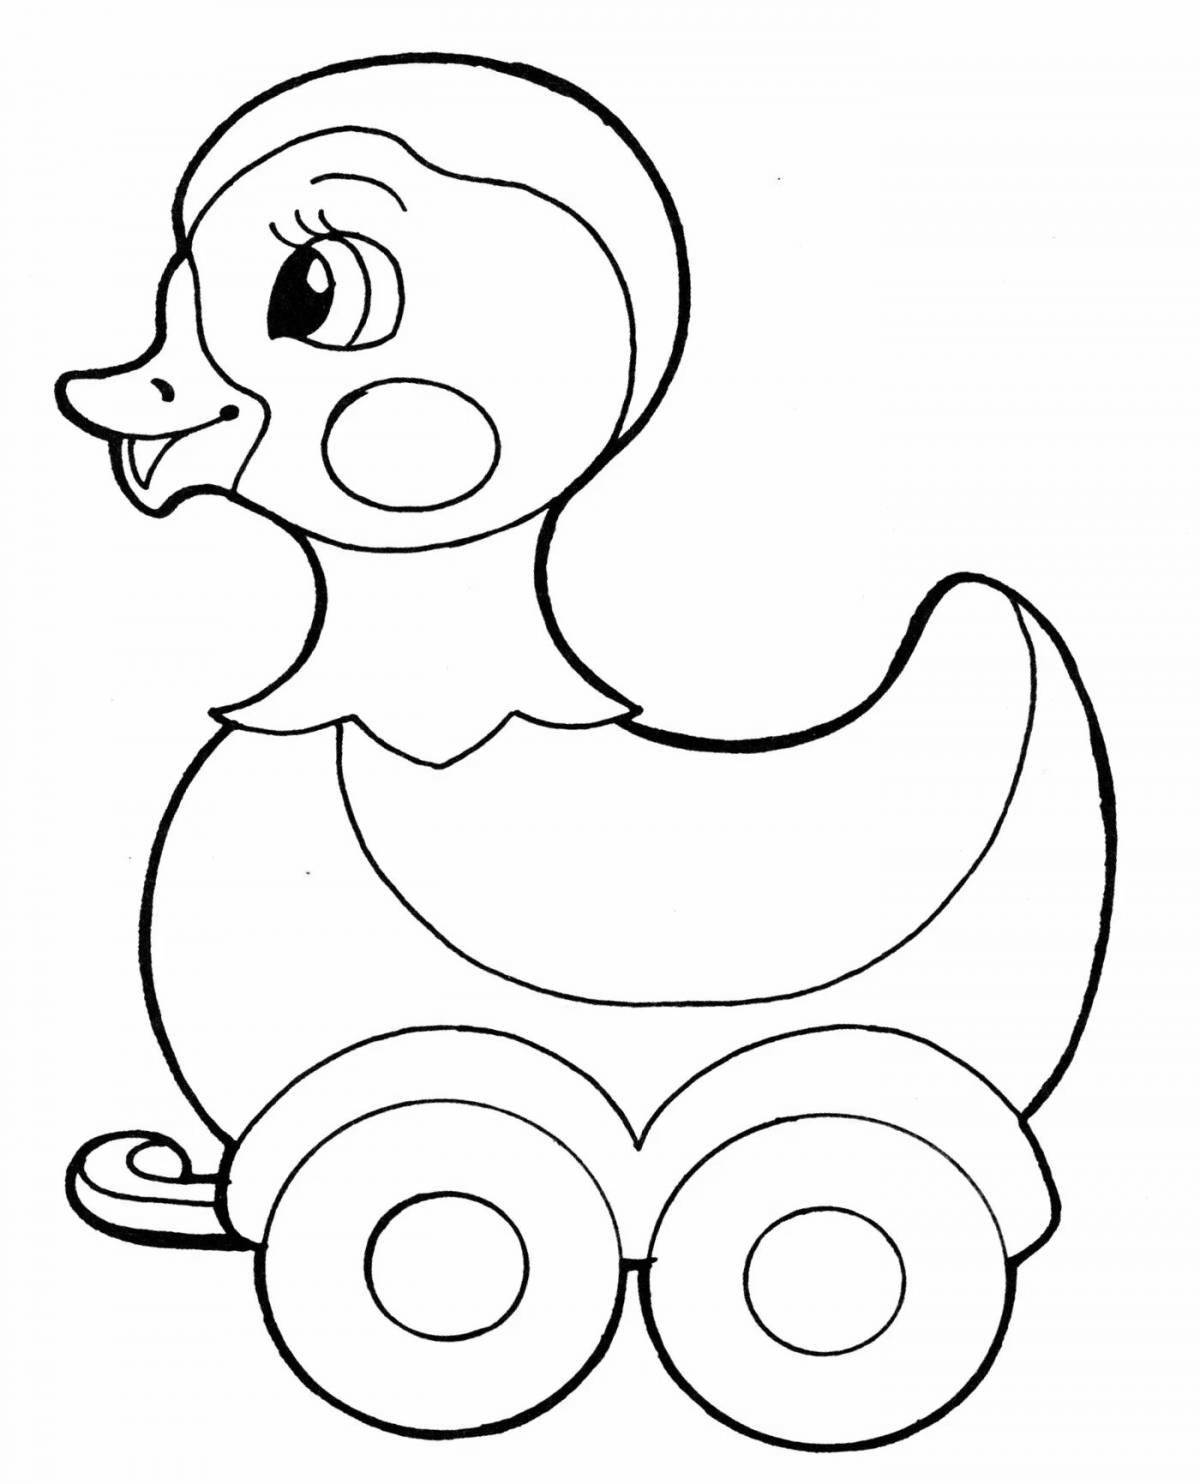 Coloring duck